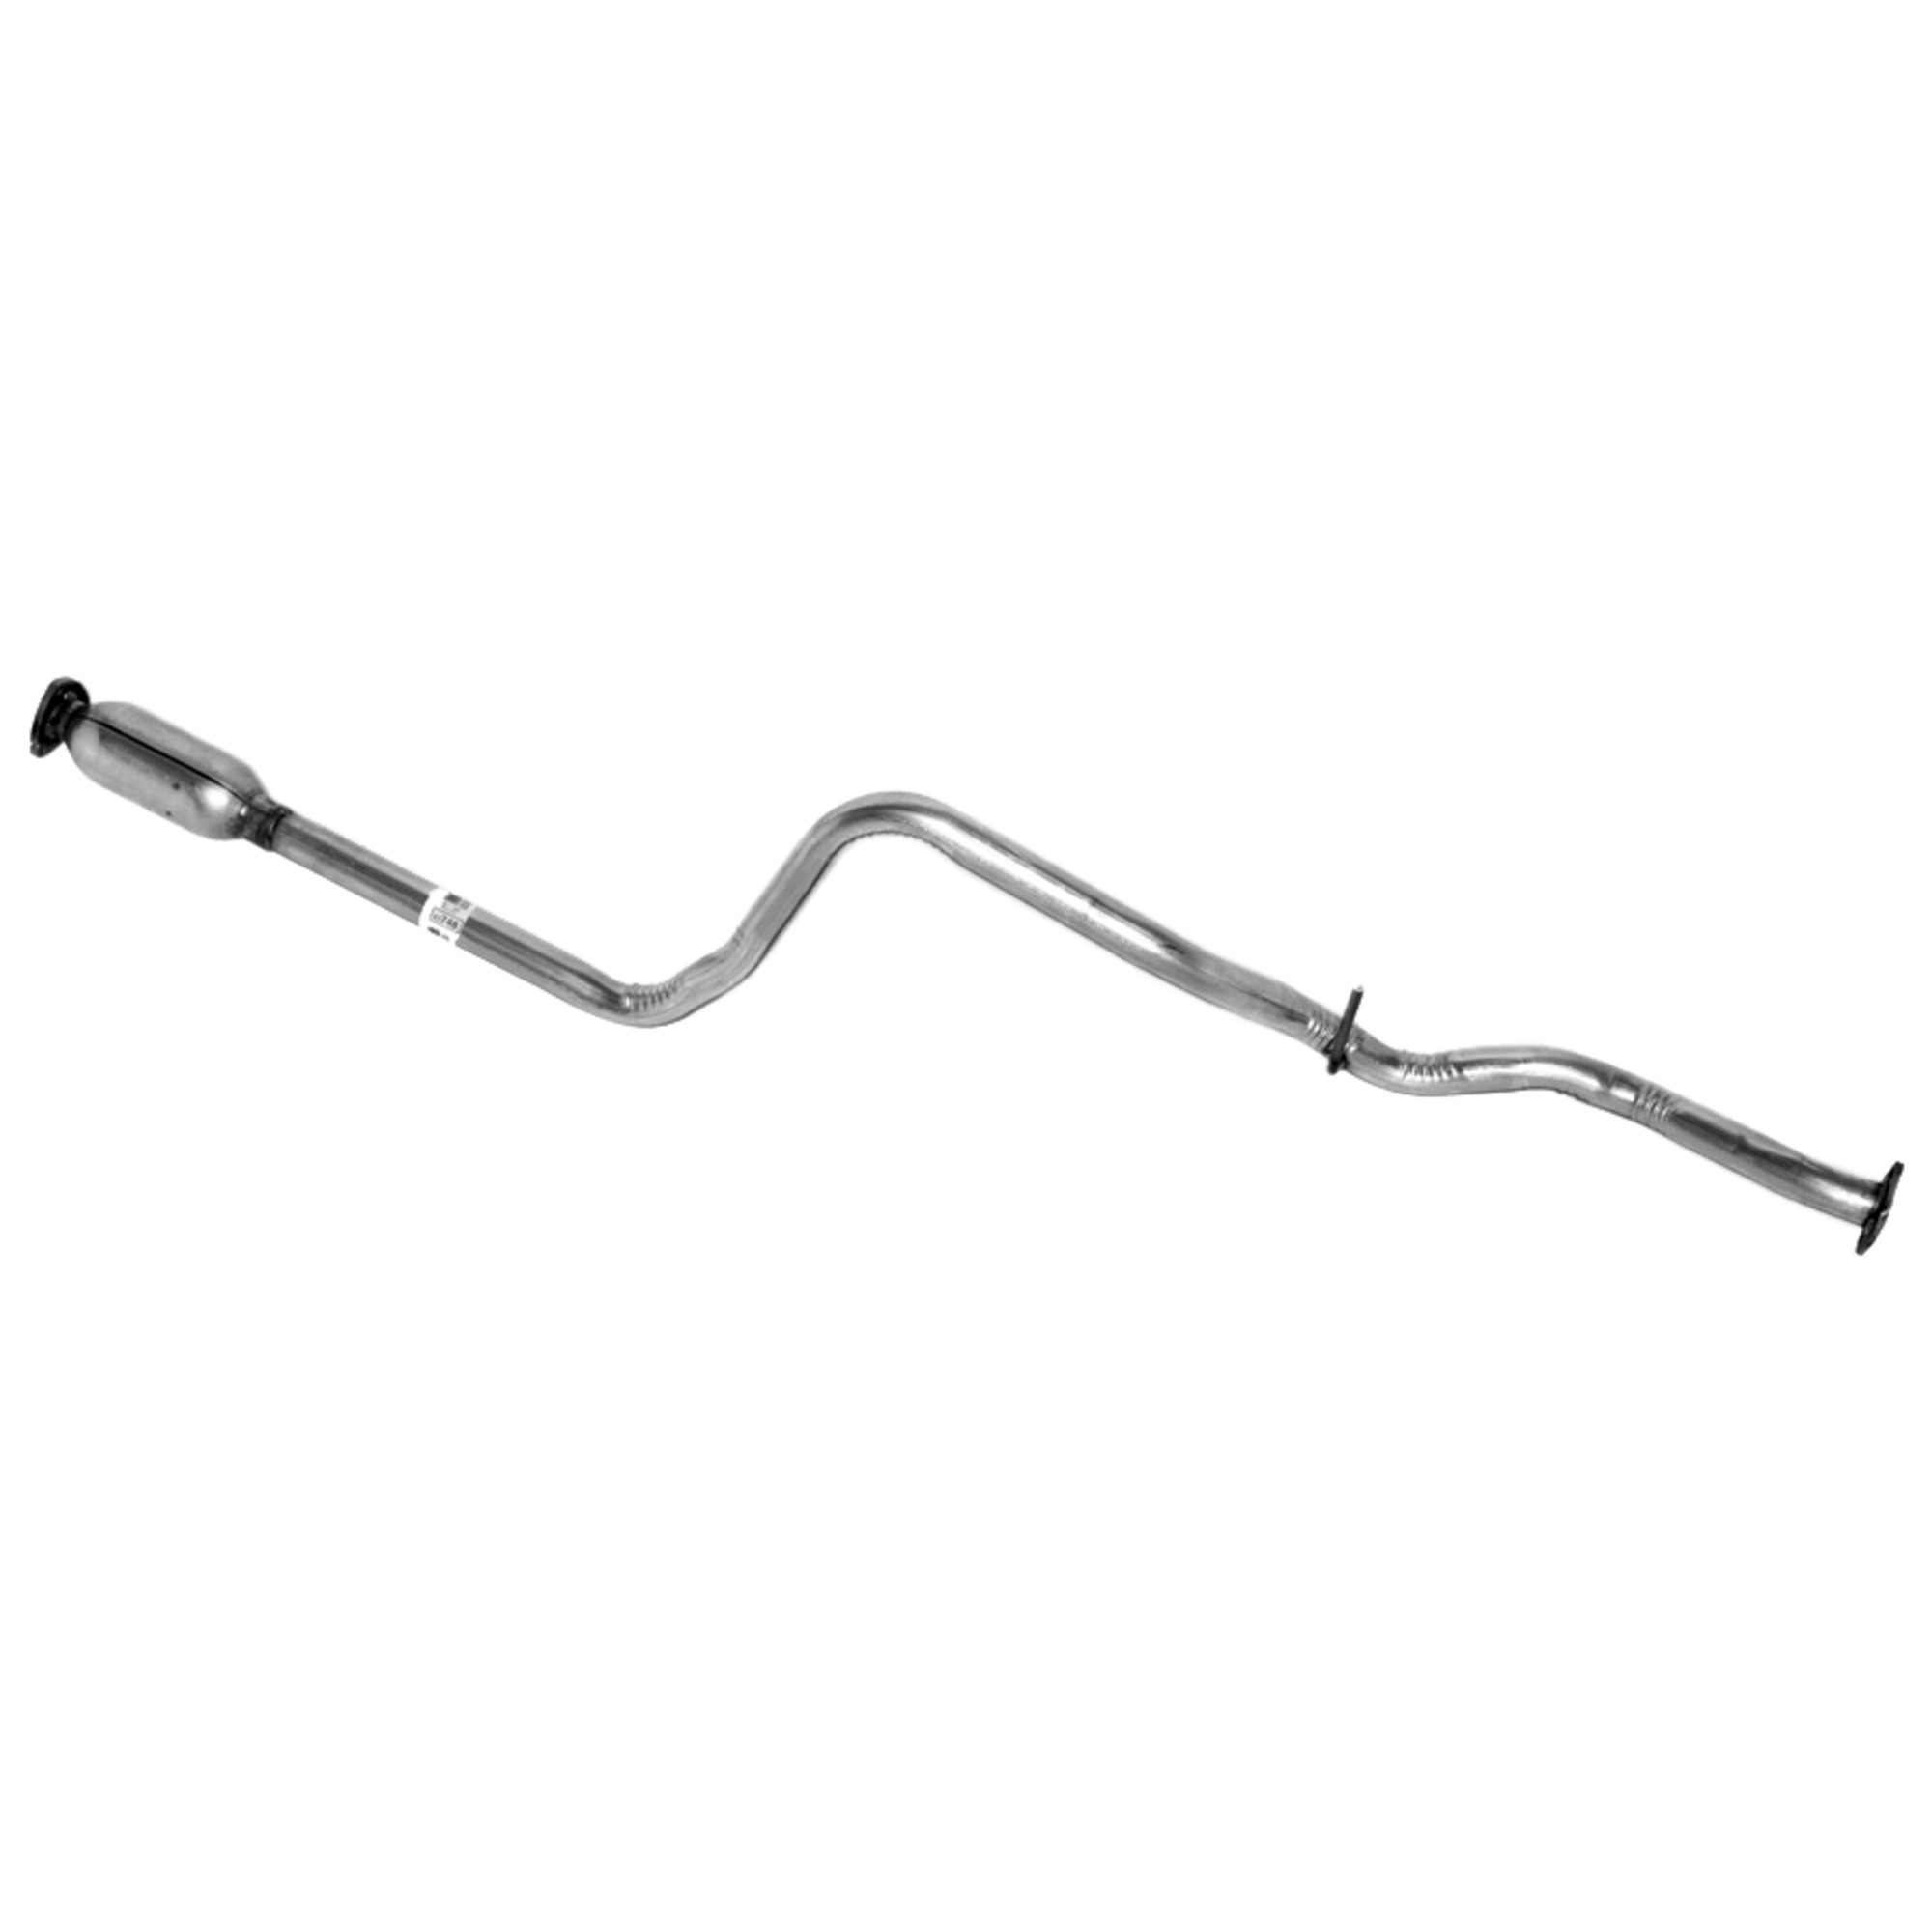 Walker Exhaust 47748 Exhaust Resonator and Pipe Assembly Fits select: 1999-2003 CHEVROLET MALIBU, 2004-2005 CHEVROLET CLASSIC - image 1 of 5